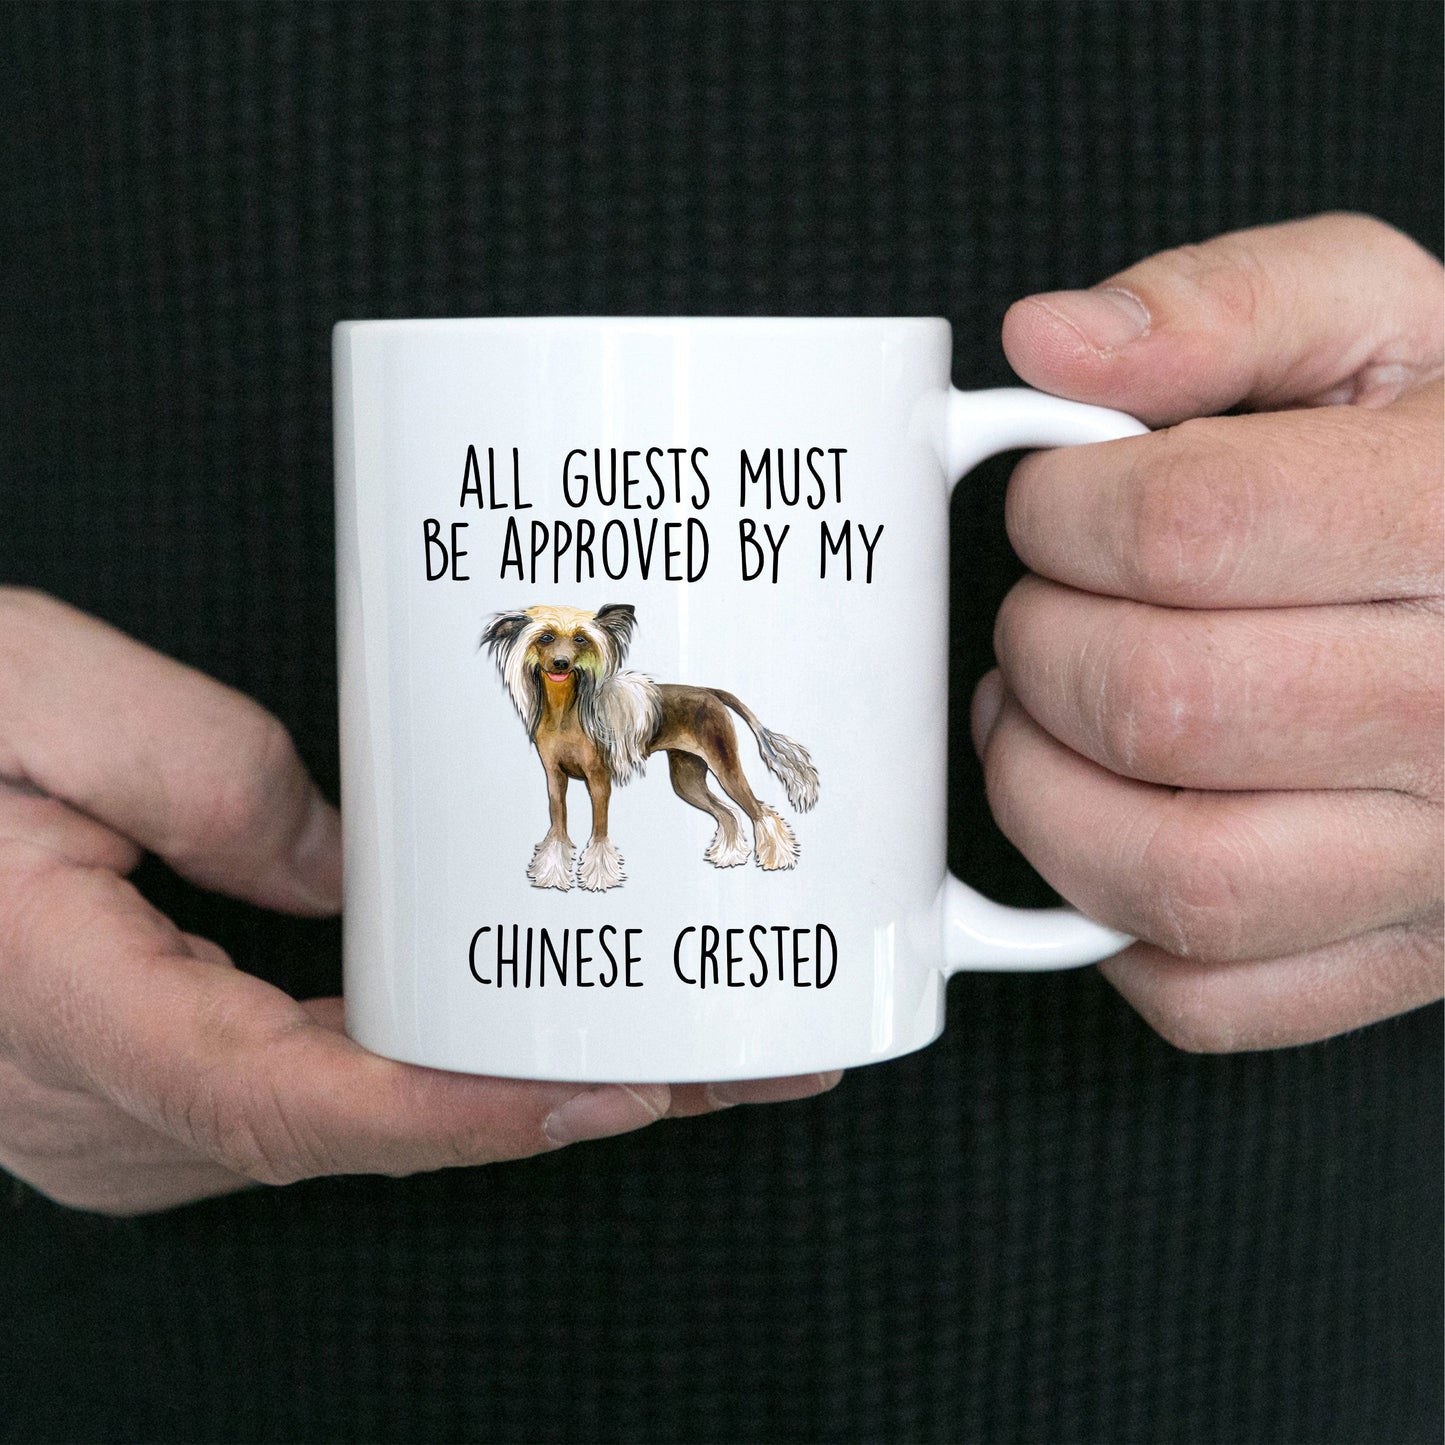 Chinese Crested Dog Funny Ceramic Coffee Mug - All guests must be approved by my Chinese Crested